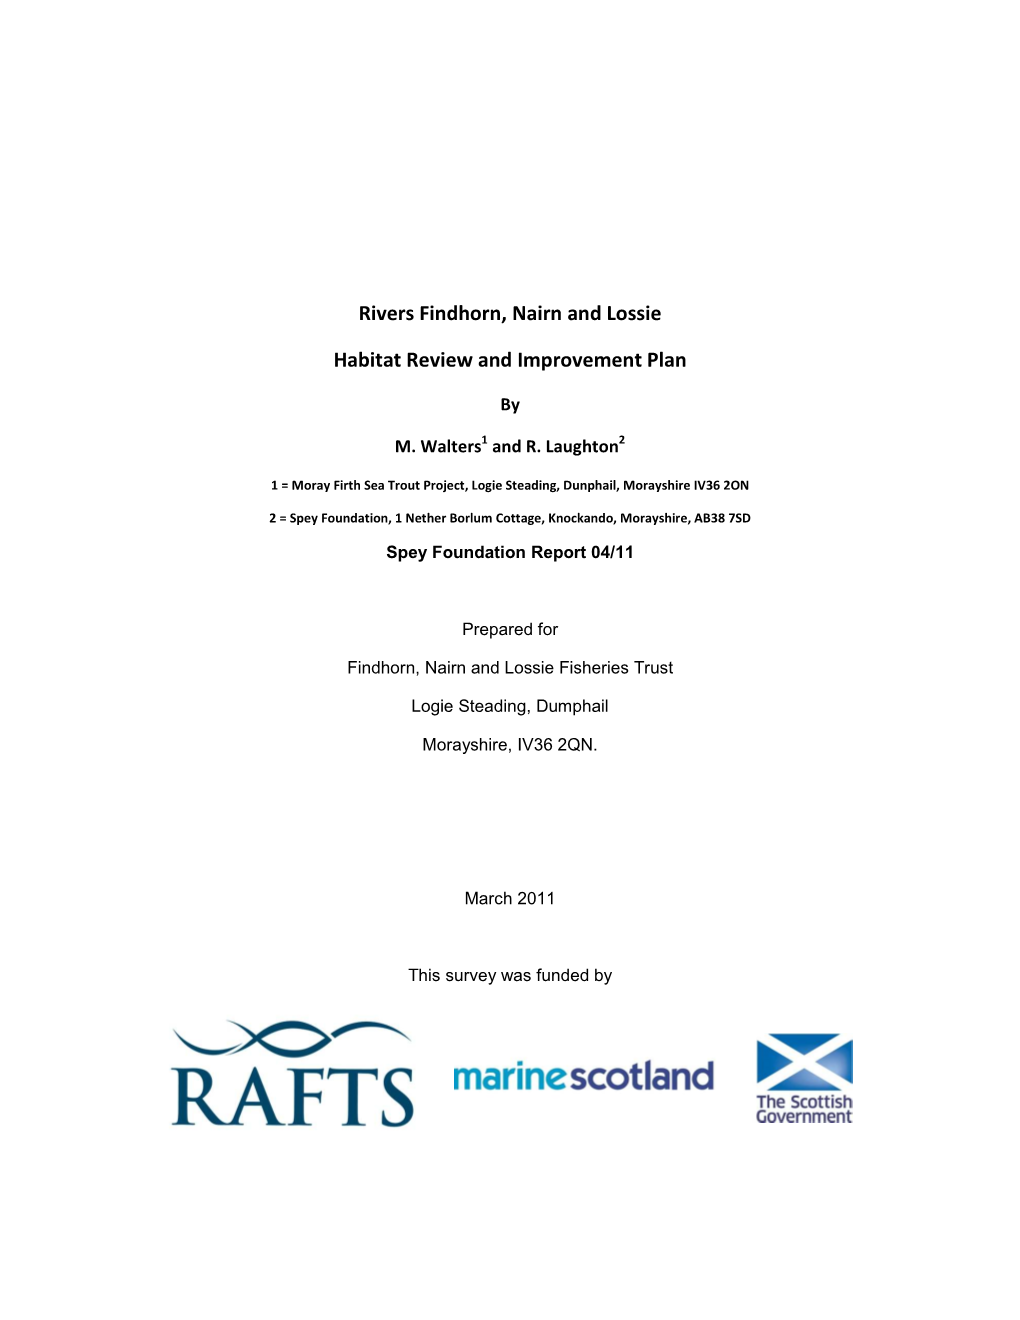 Rivers Findhorn, Nairn and Lossie Habitat Review and Improvement Plan